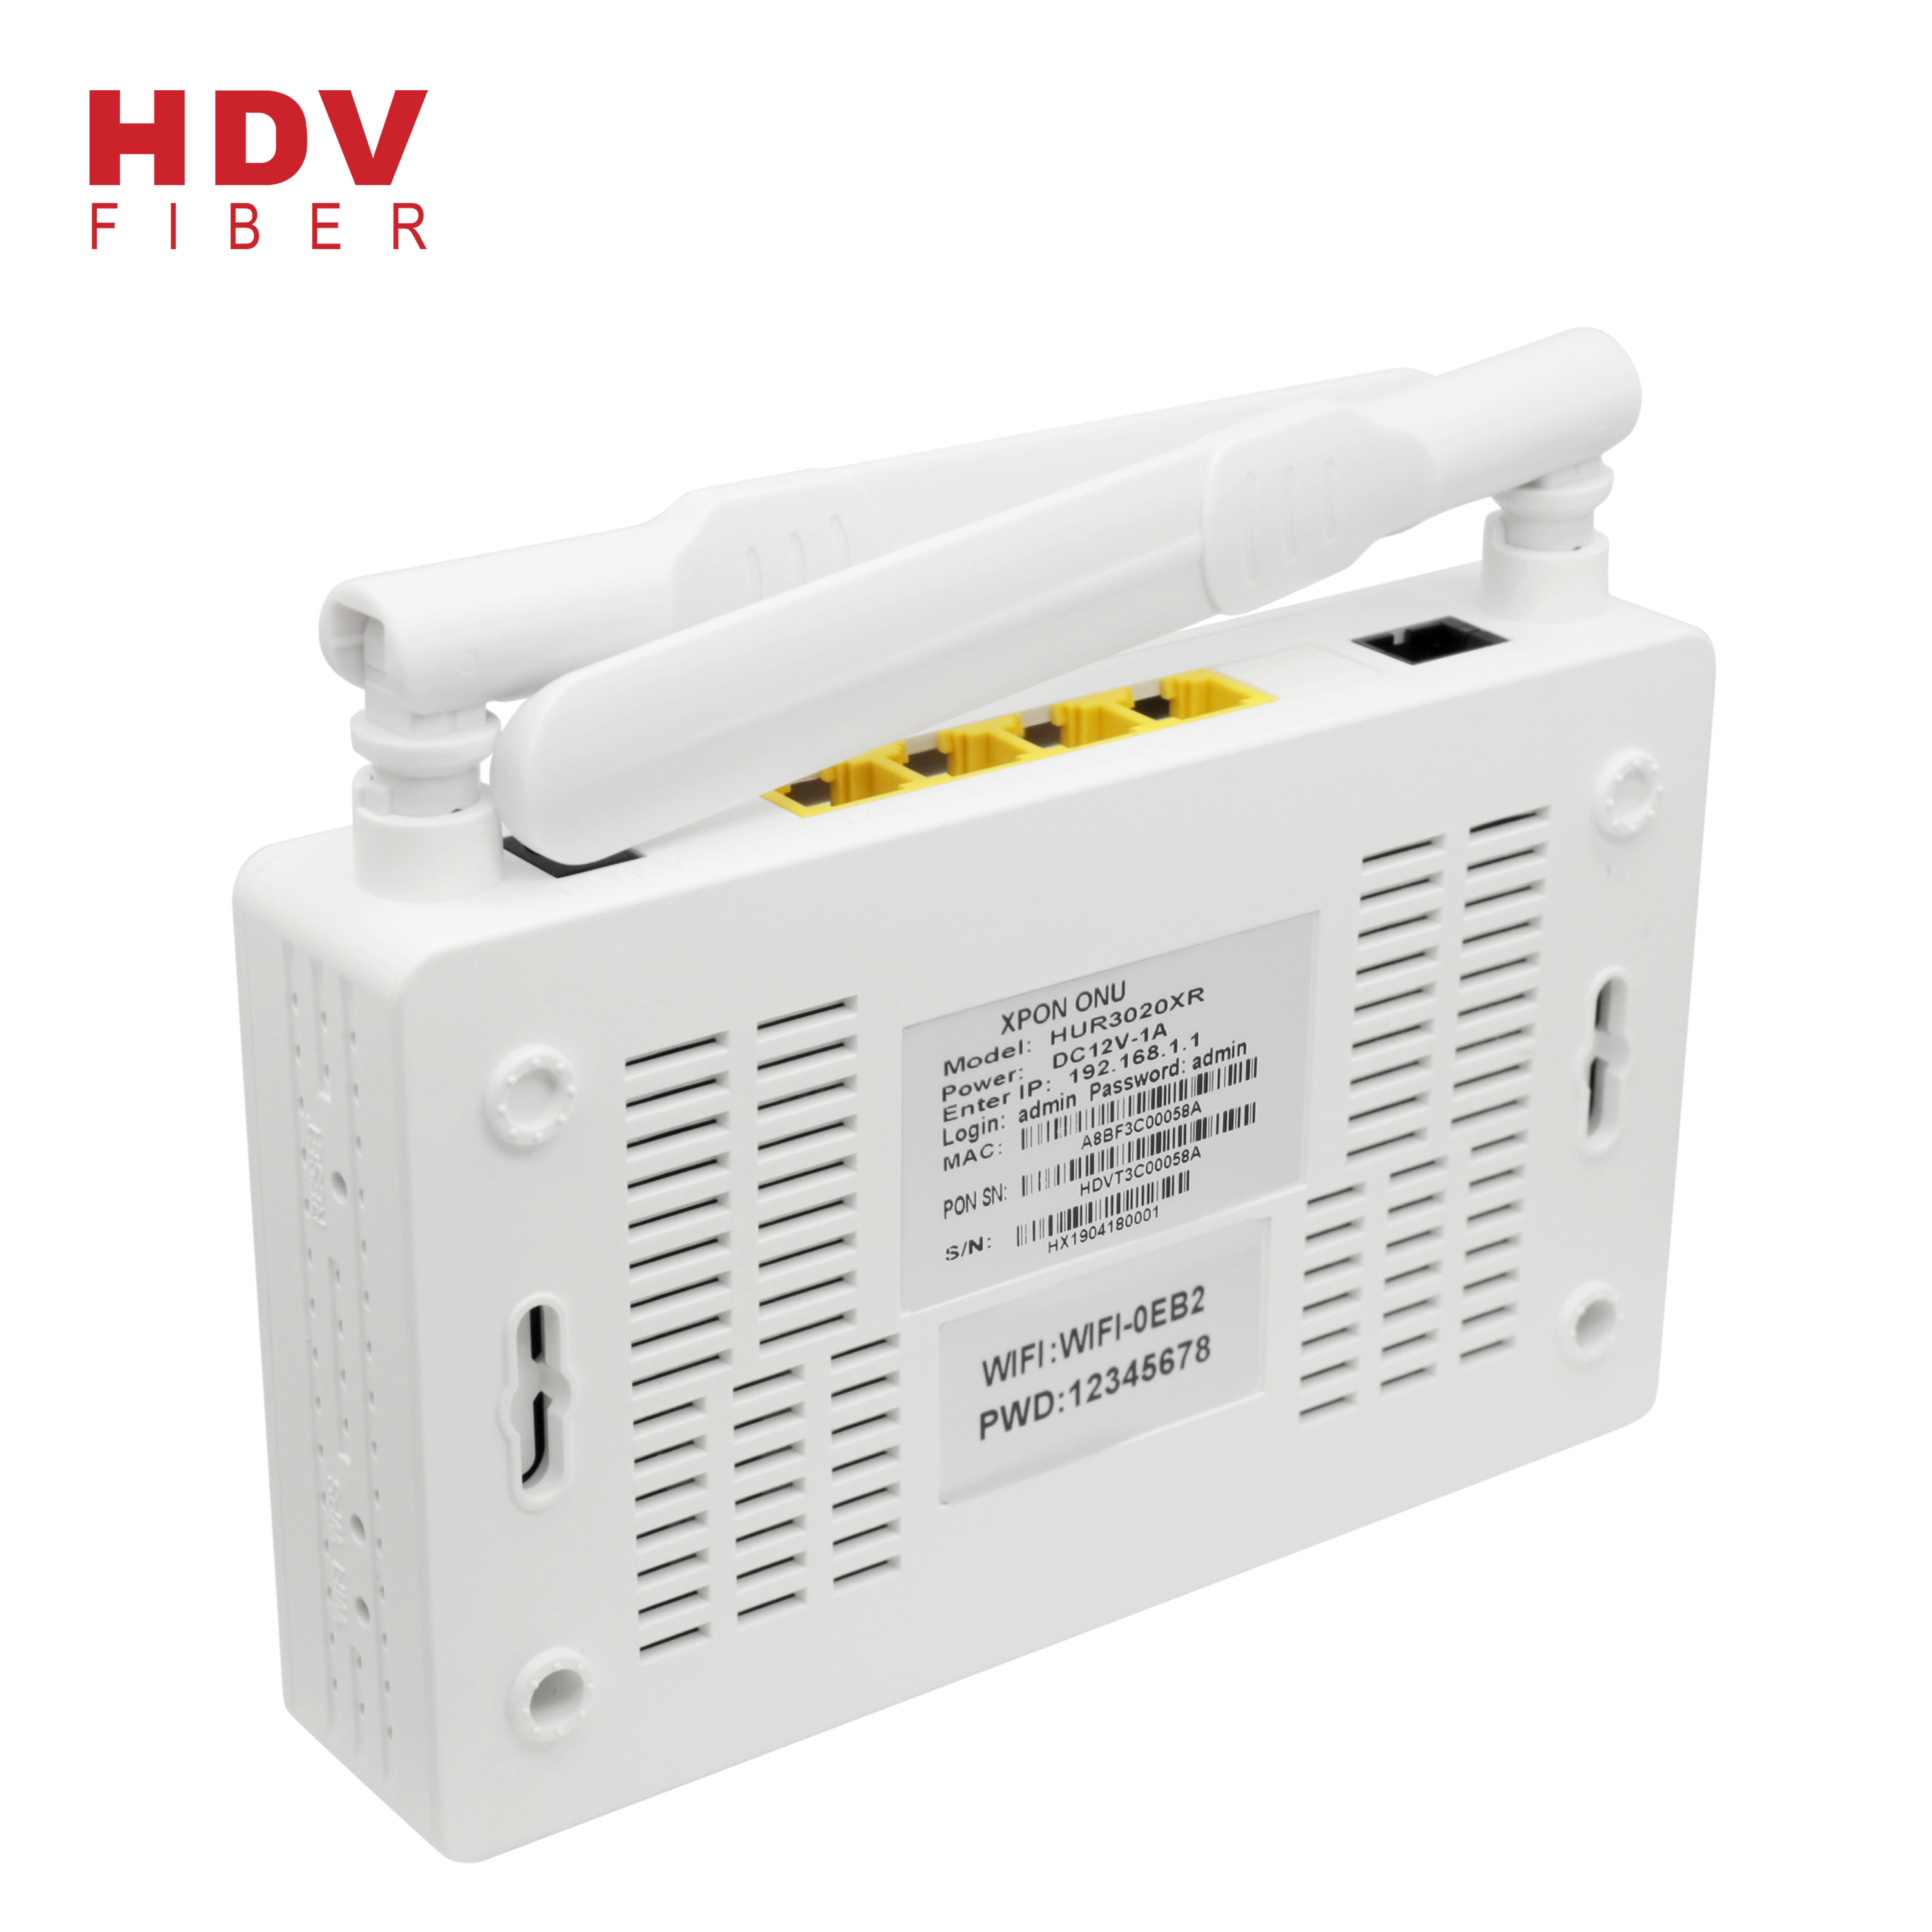 China Gigabit Compatible Huawei Wifi Zte F660 Used Pon 1ge 3fe Xpon Onu Manufacturer And Supplier Hdv